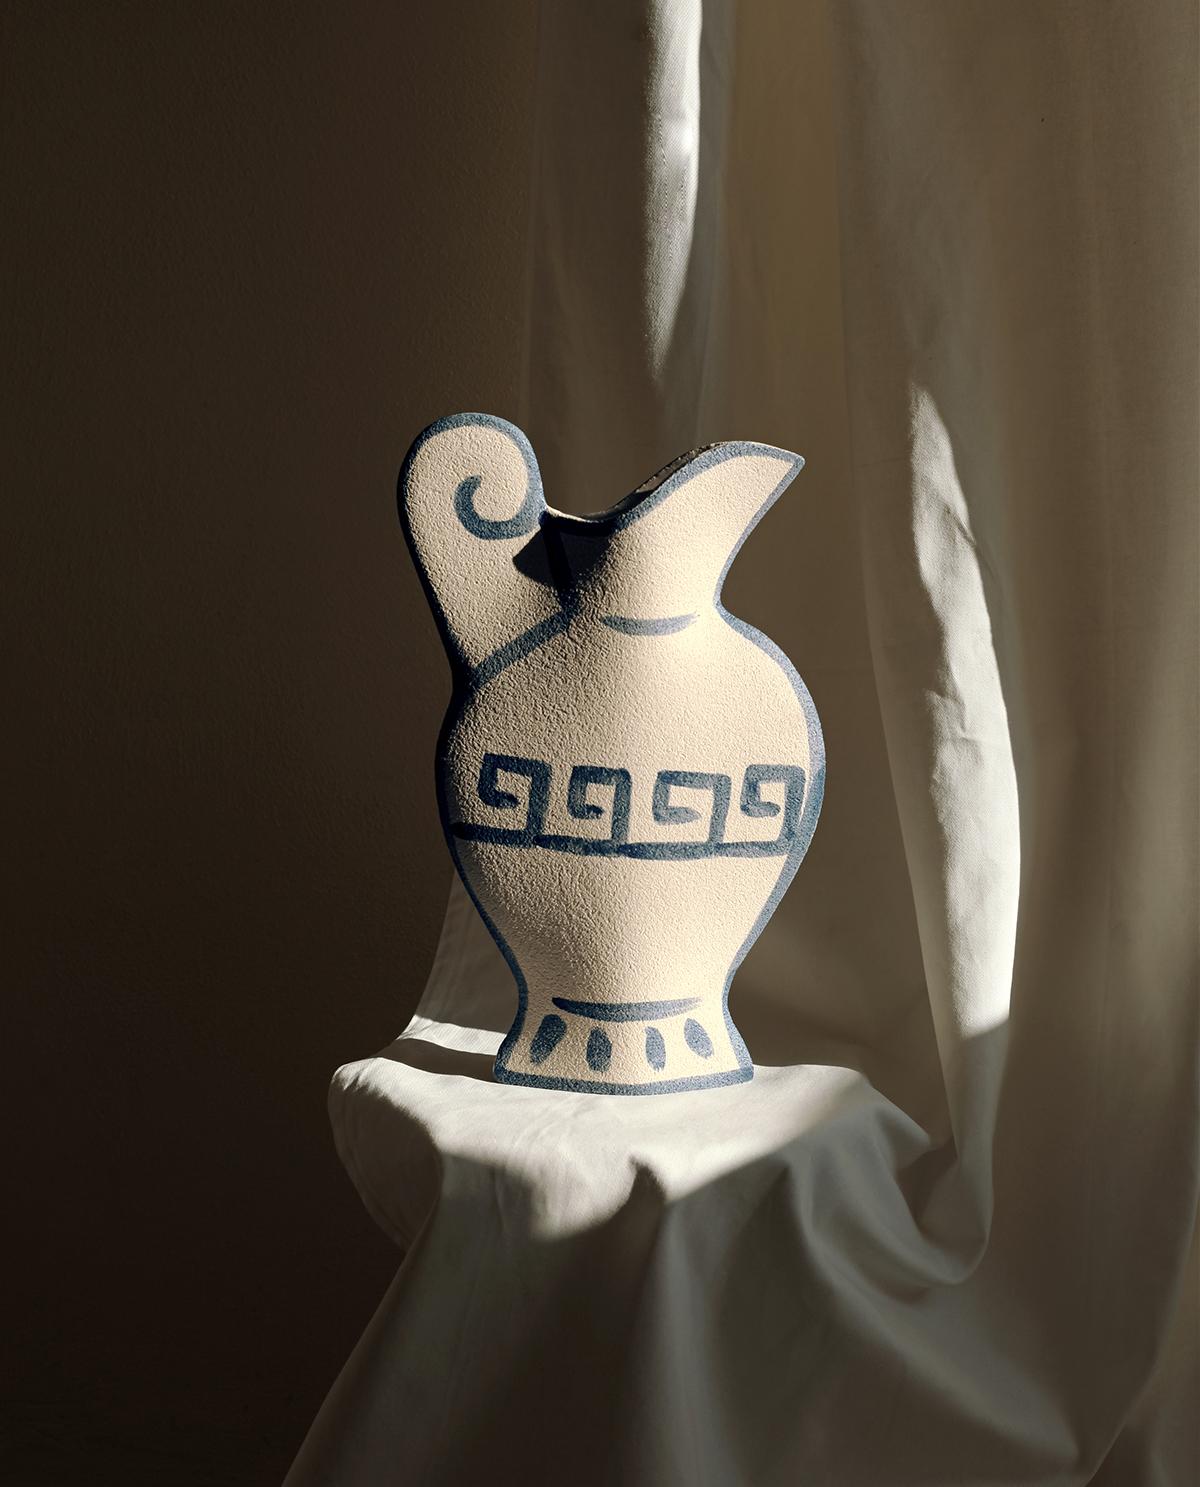 A part of a captivating new line blending ancient Greek pottery with contemporary design, the ‘Greek Pitcher N°2’ vase showcases delicate blue underglaze illustrations that harmonize traditional and modern aesthetics.
Crafted by our designer, the